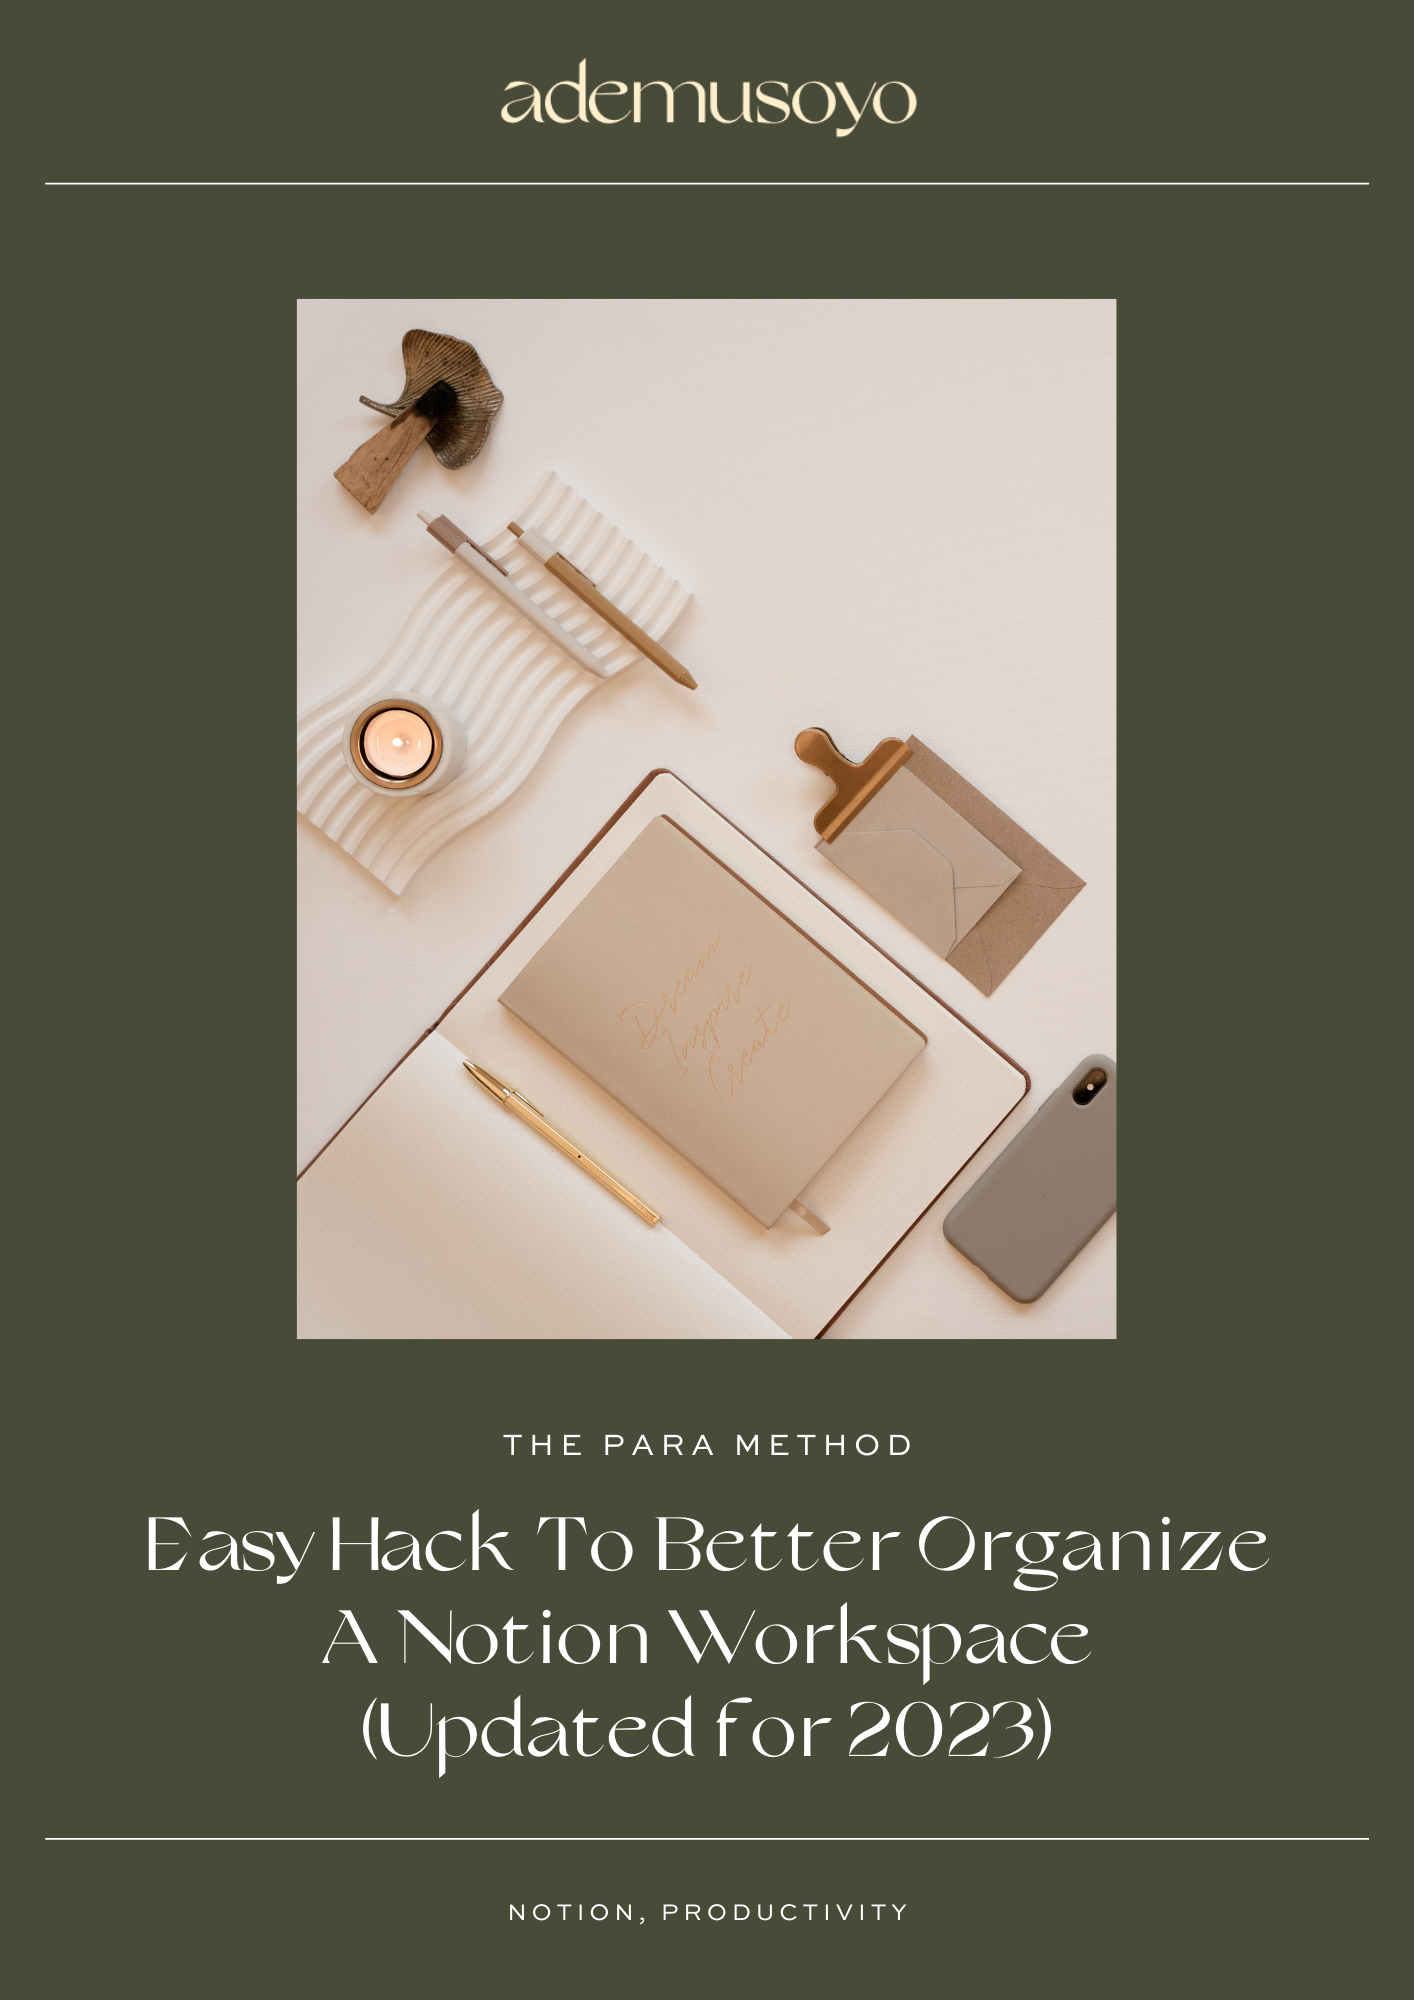 The PARA Method: Easy Hack To Better Organize A Notion Workspace (Updated for 2023)